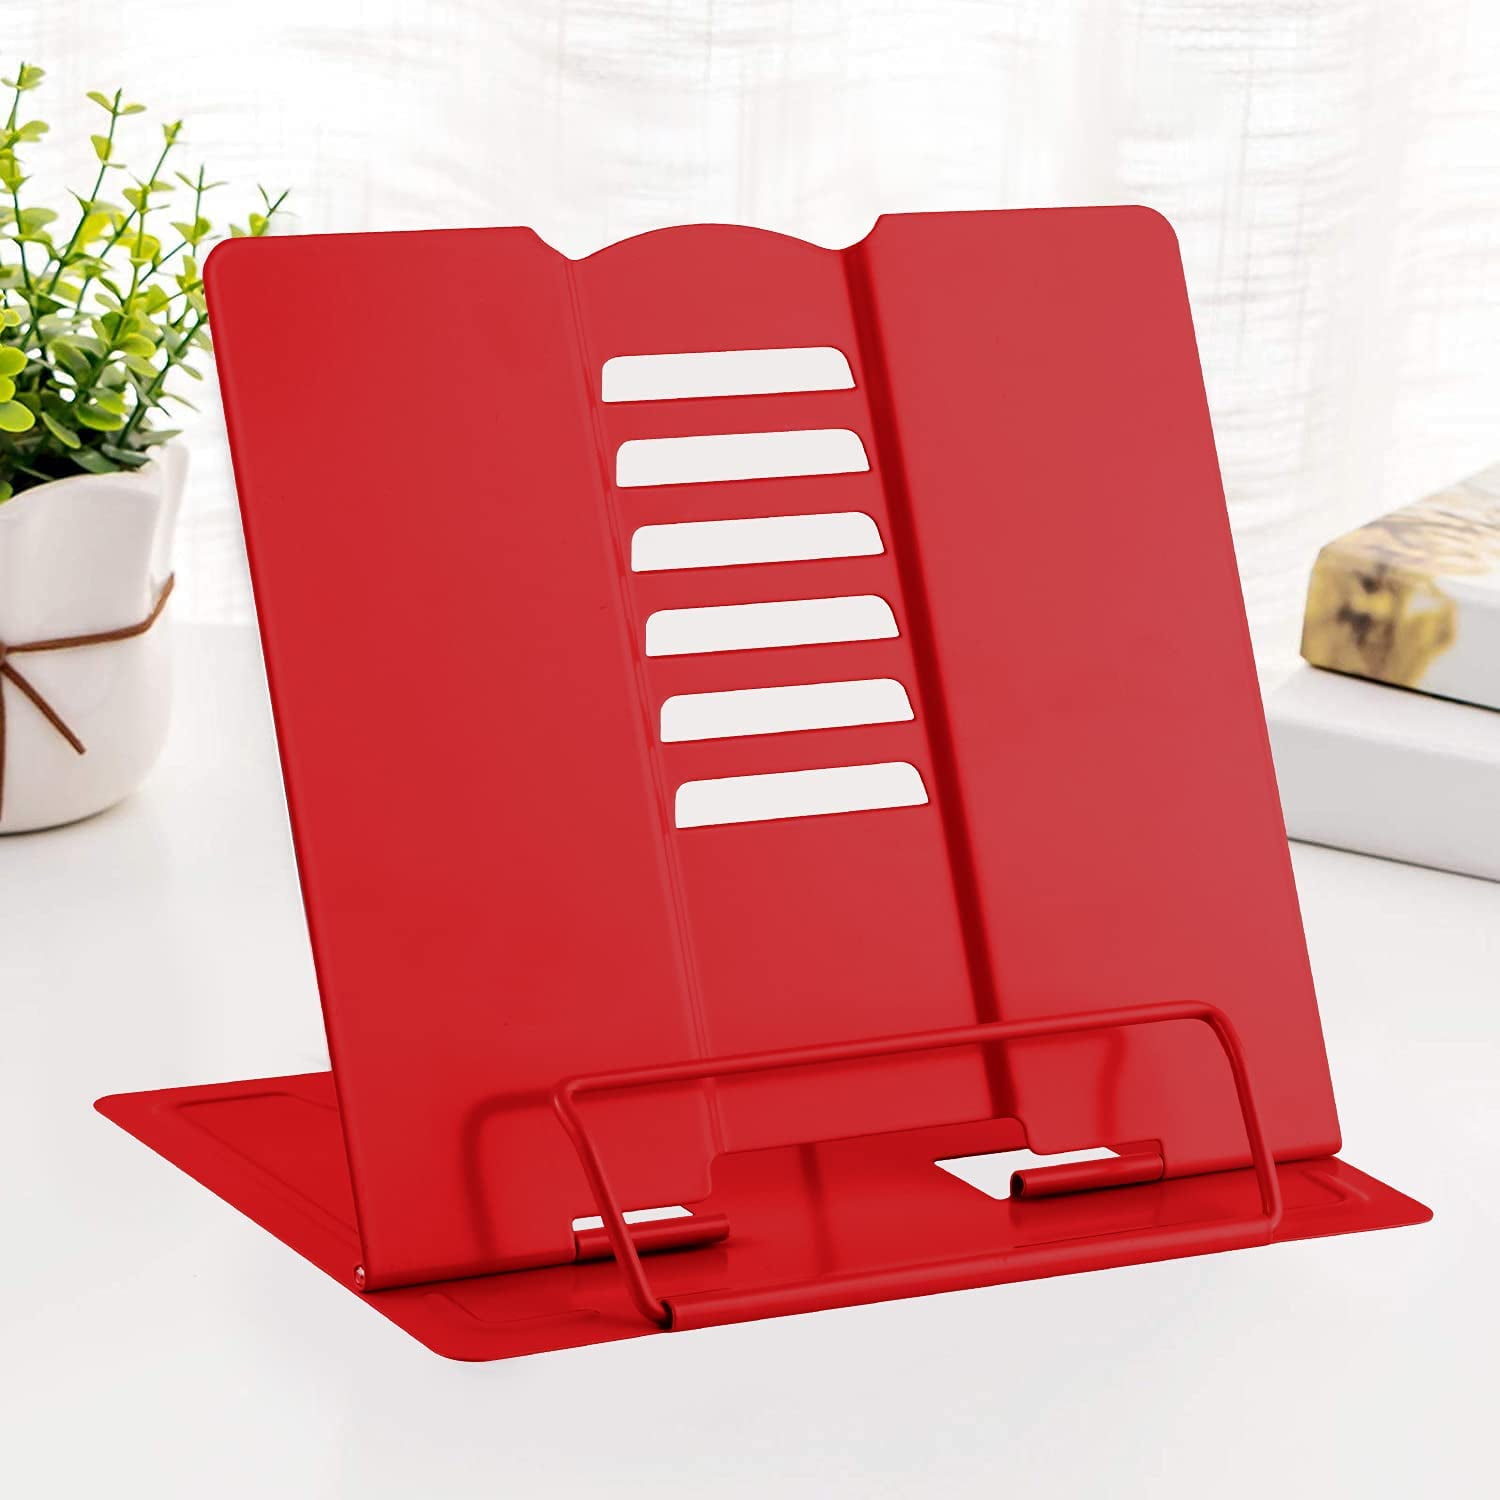 red Premium Quality Folding Reading Rest Cookbook Stand,Portable Holder Books Recipe Shelf Reading Bookend Stand for Office and School 